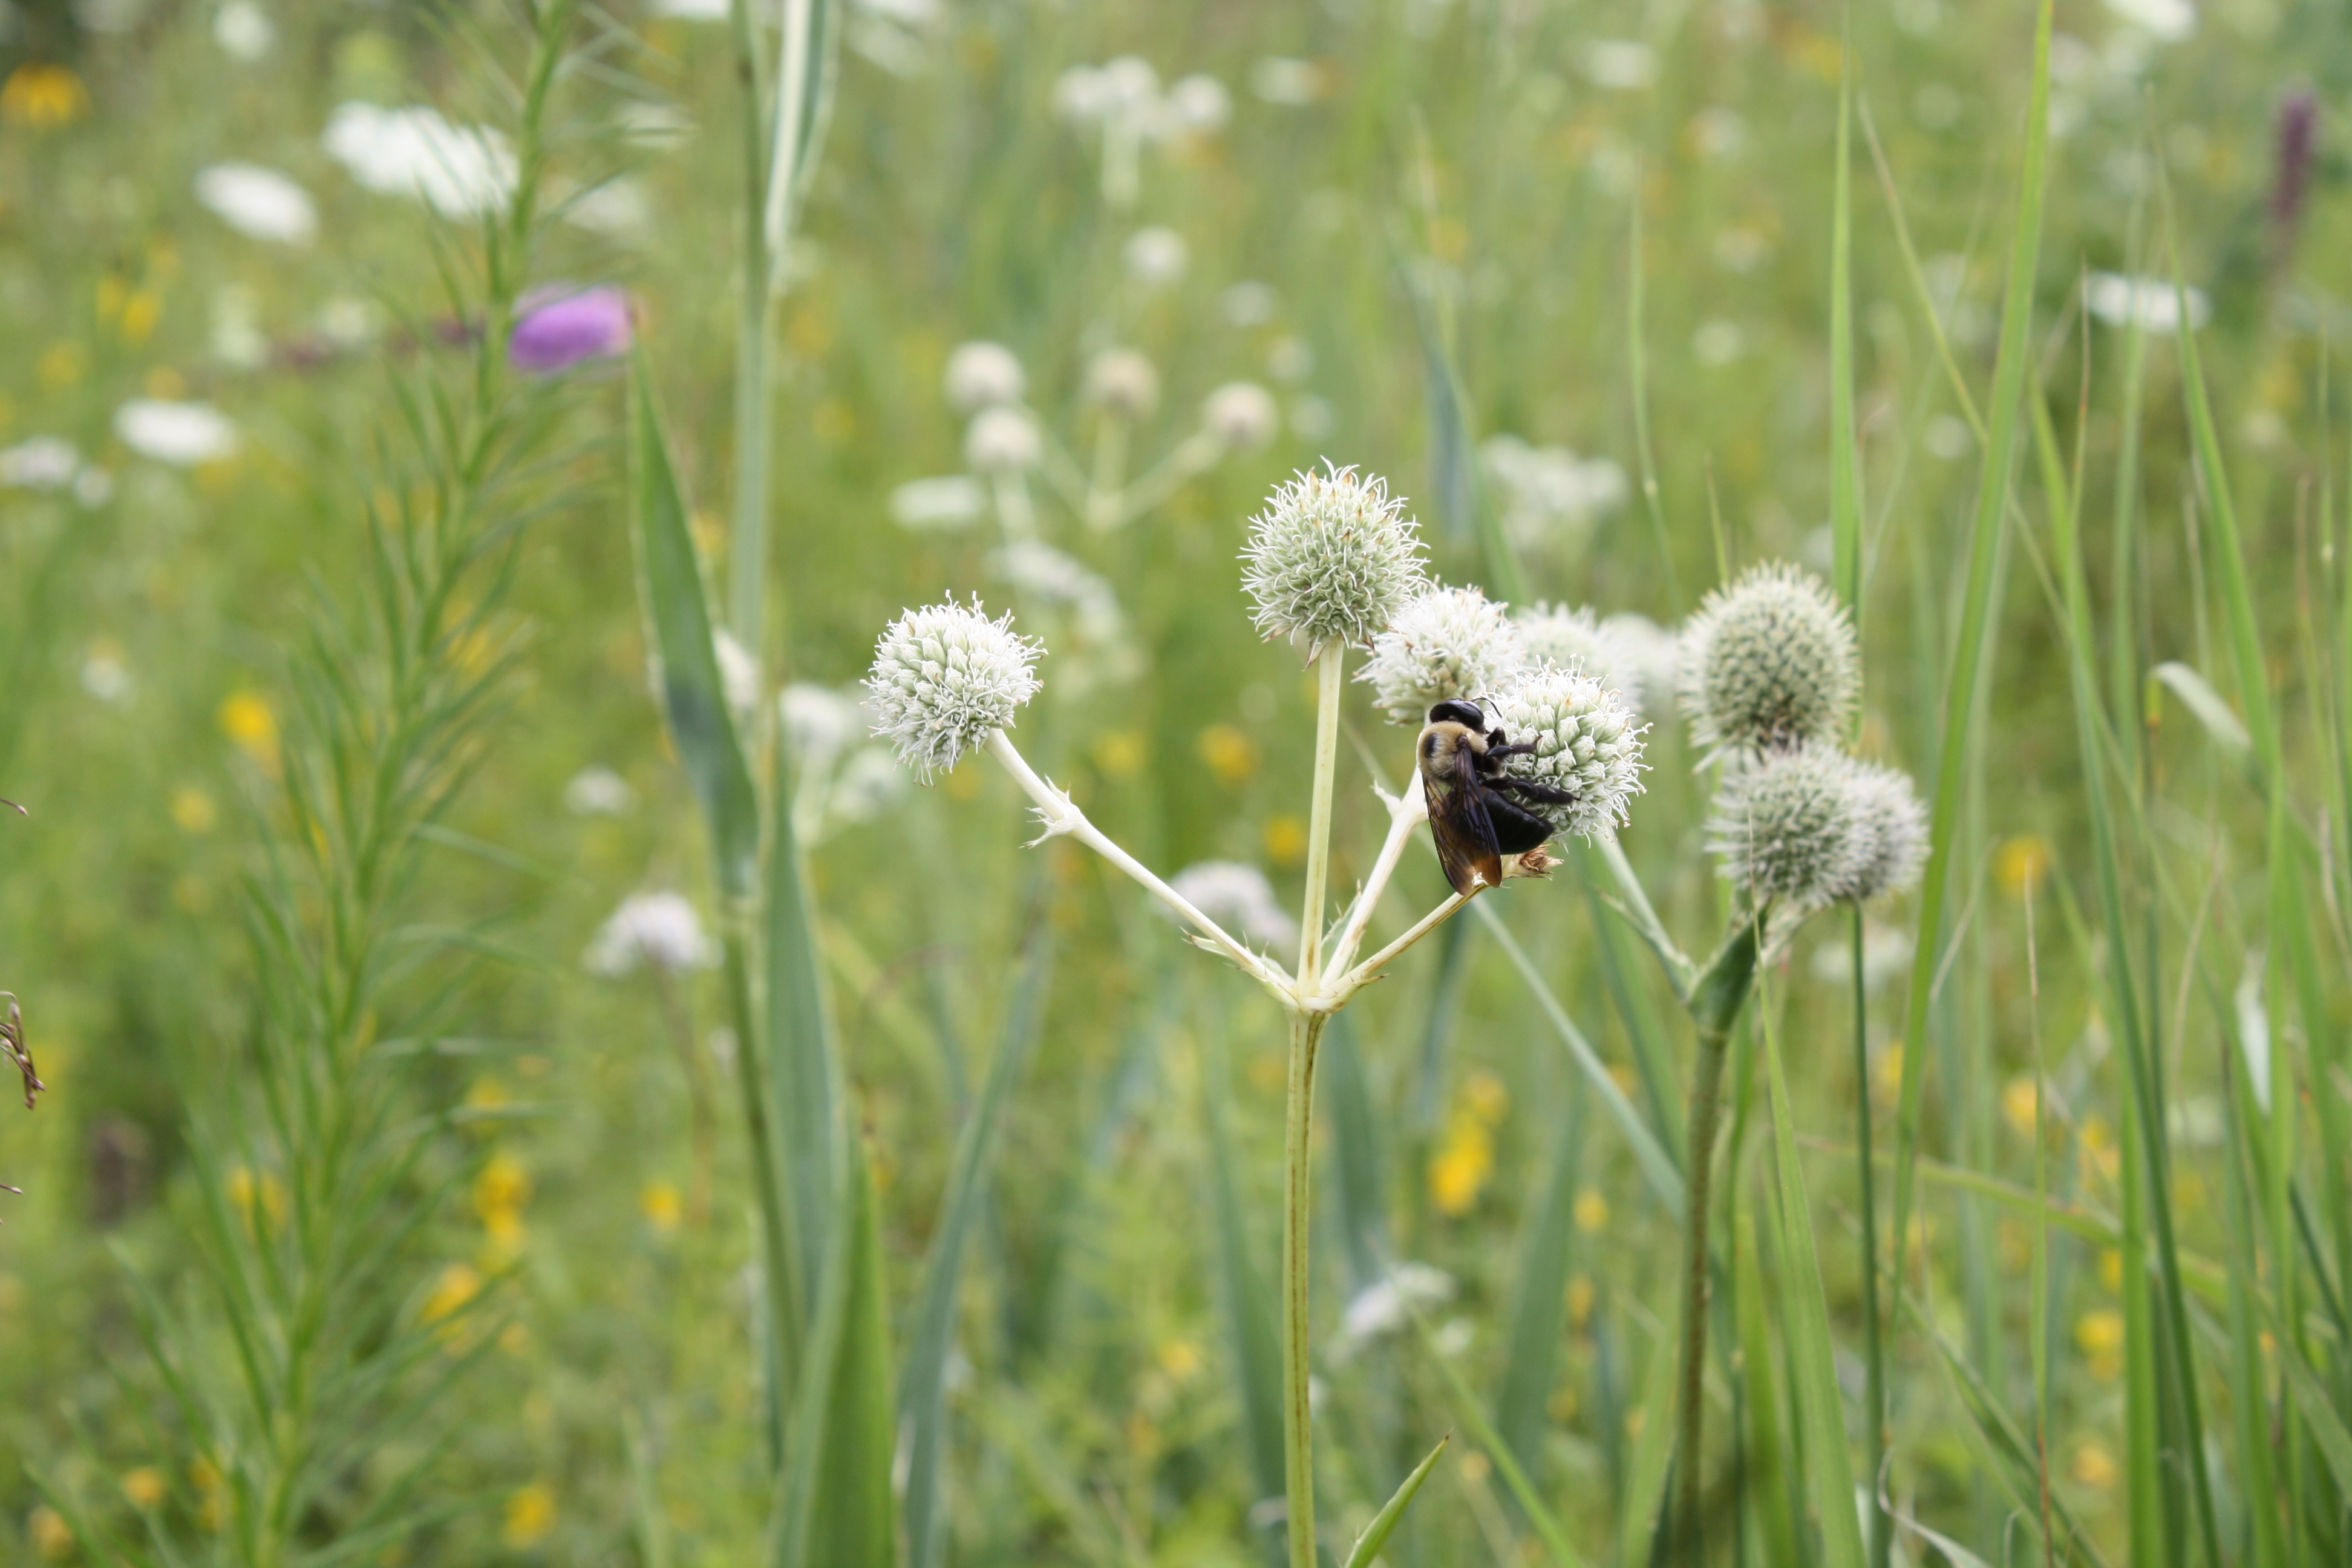 A bee perched on a light blue-green plant with round buds. The background is an out-of-focus green prairie.